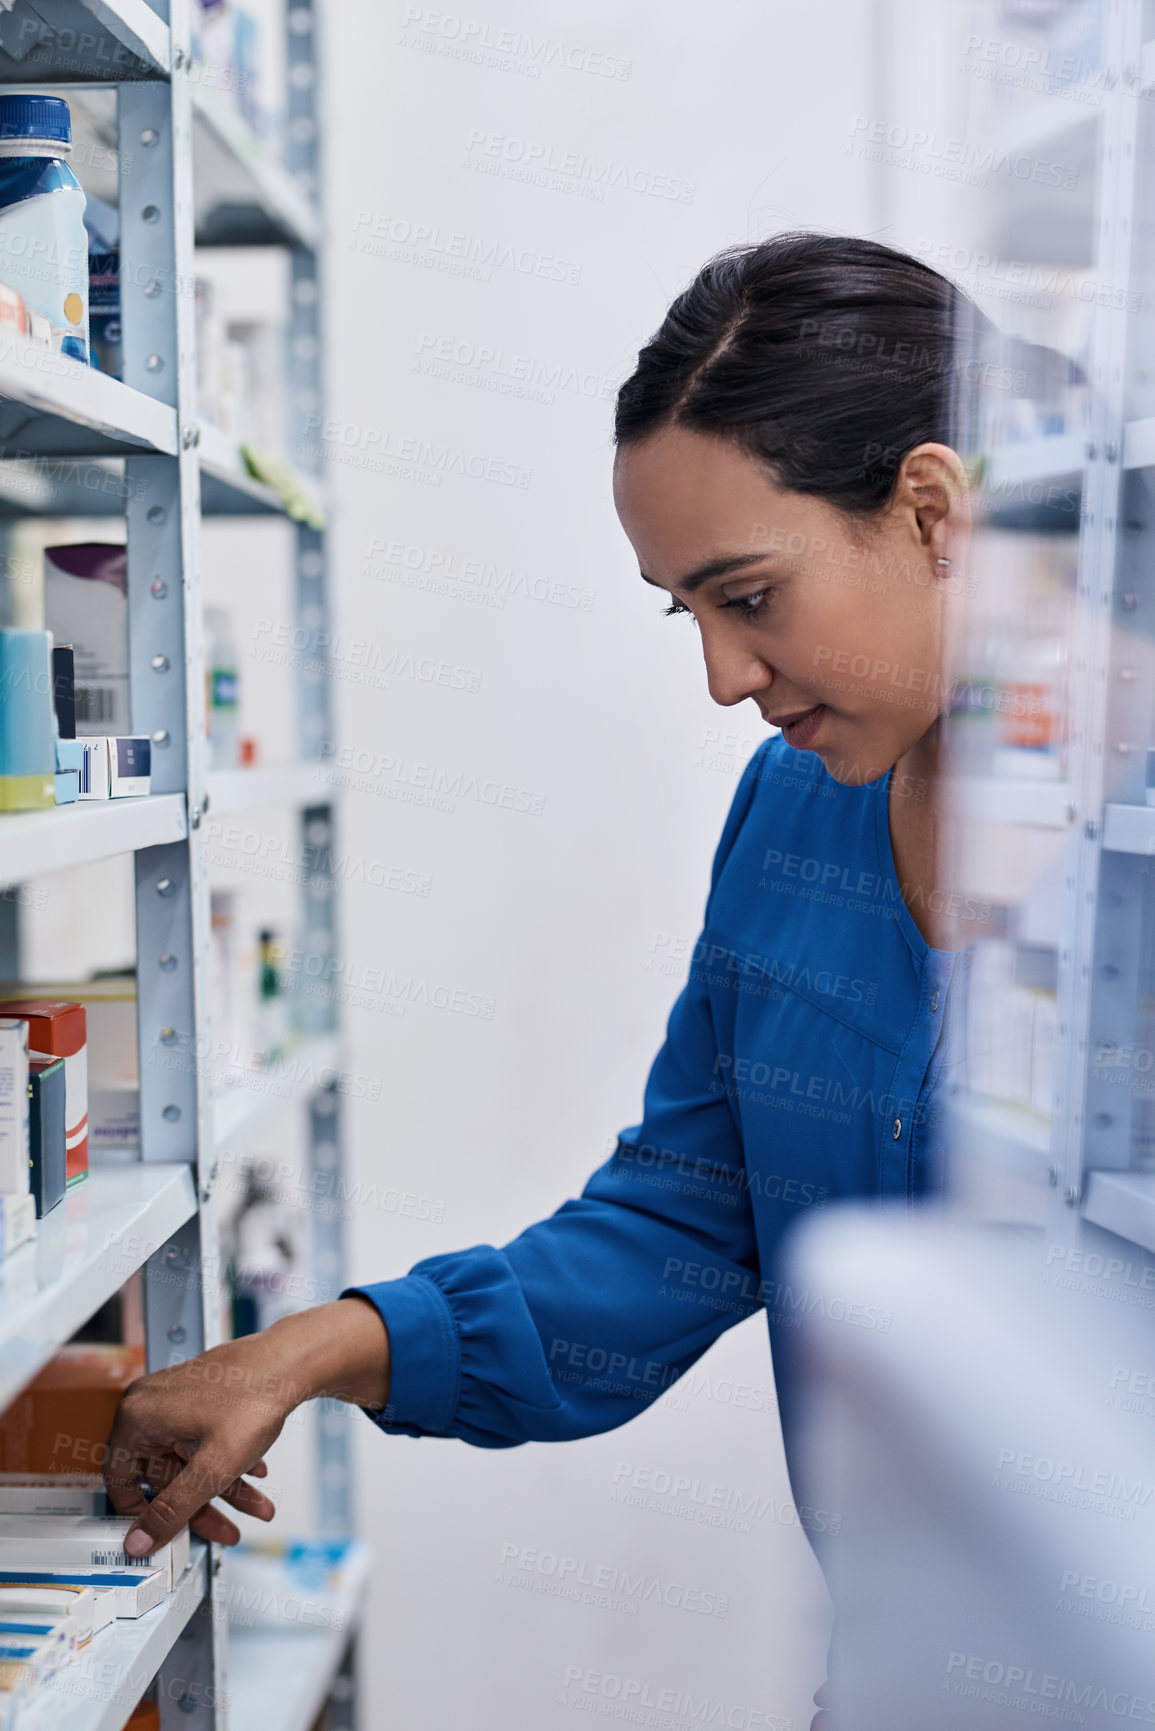 Buy stock photo Shot of a young woman shopping at a pharmacy